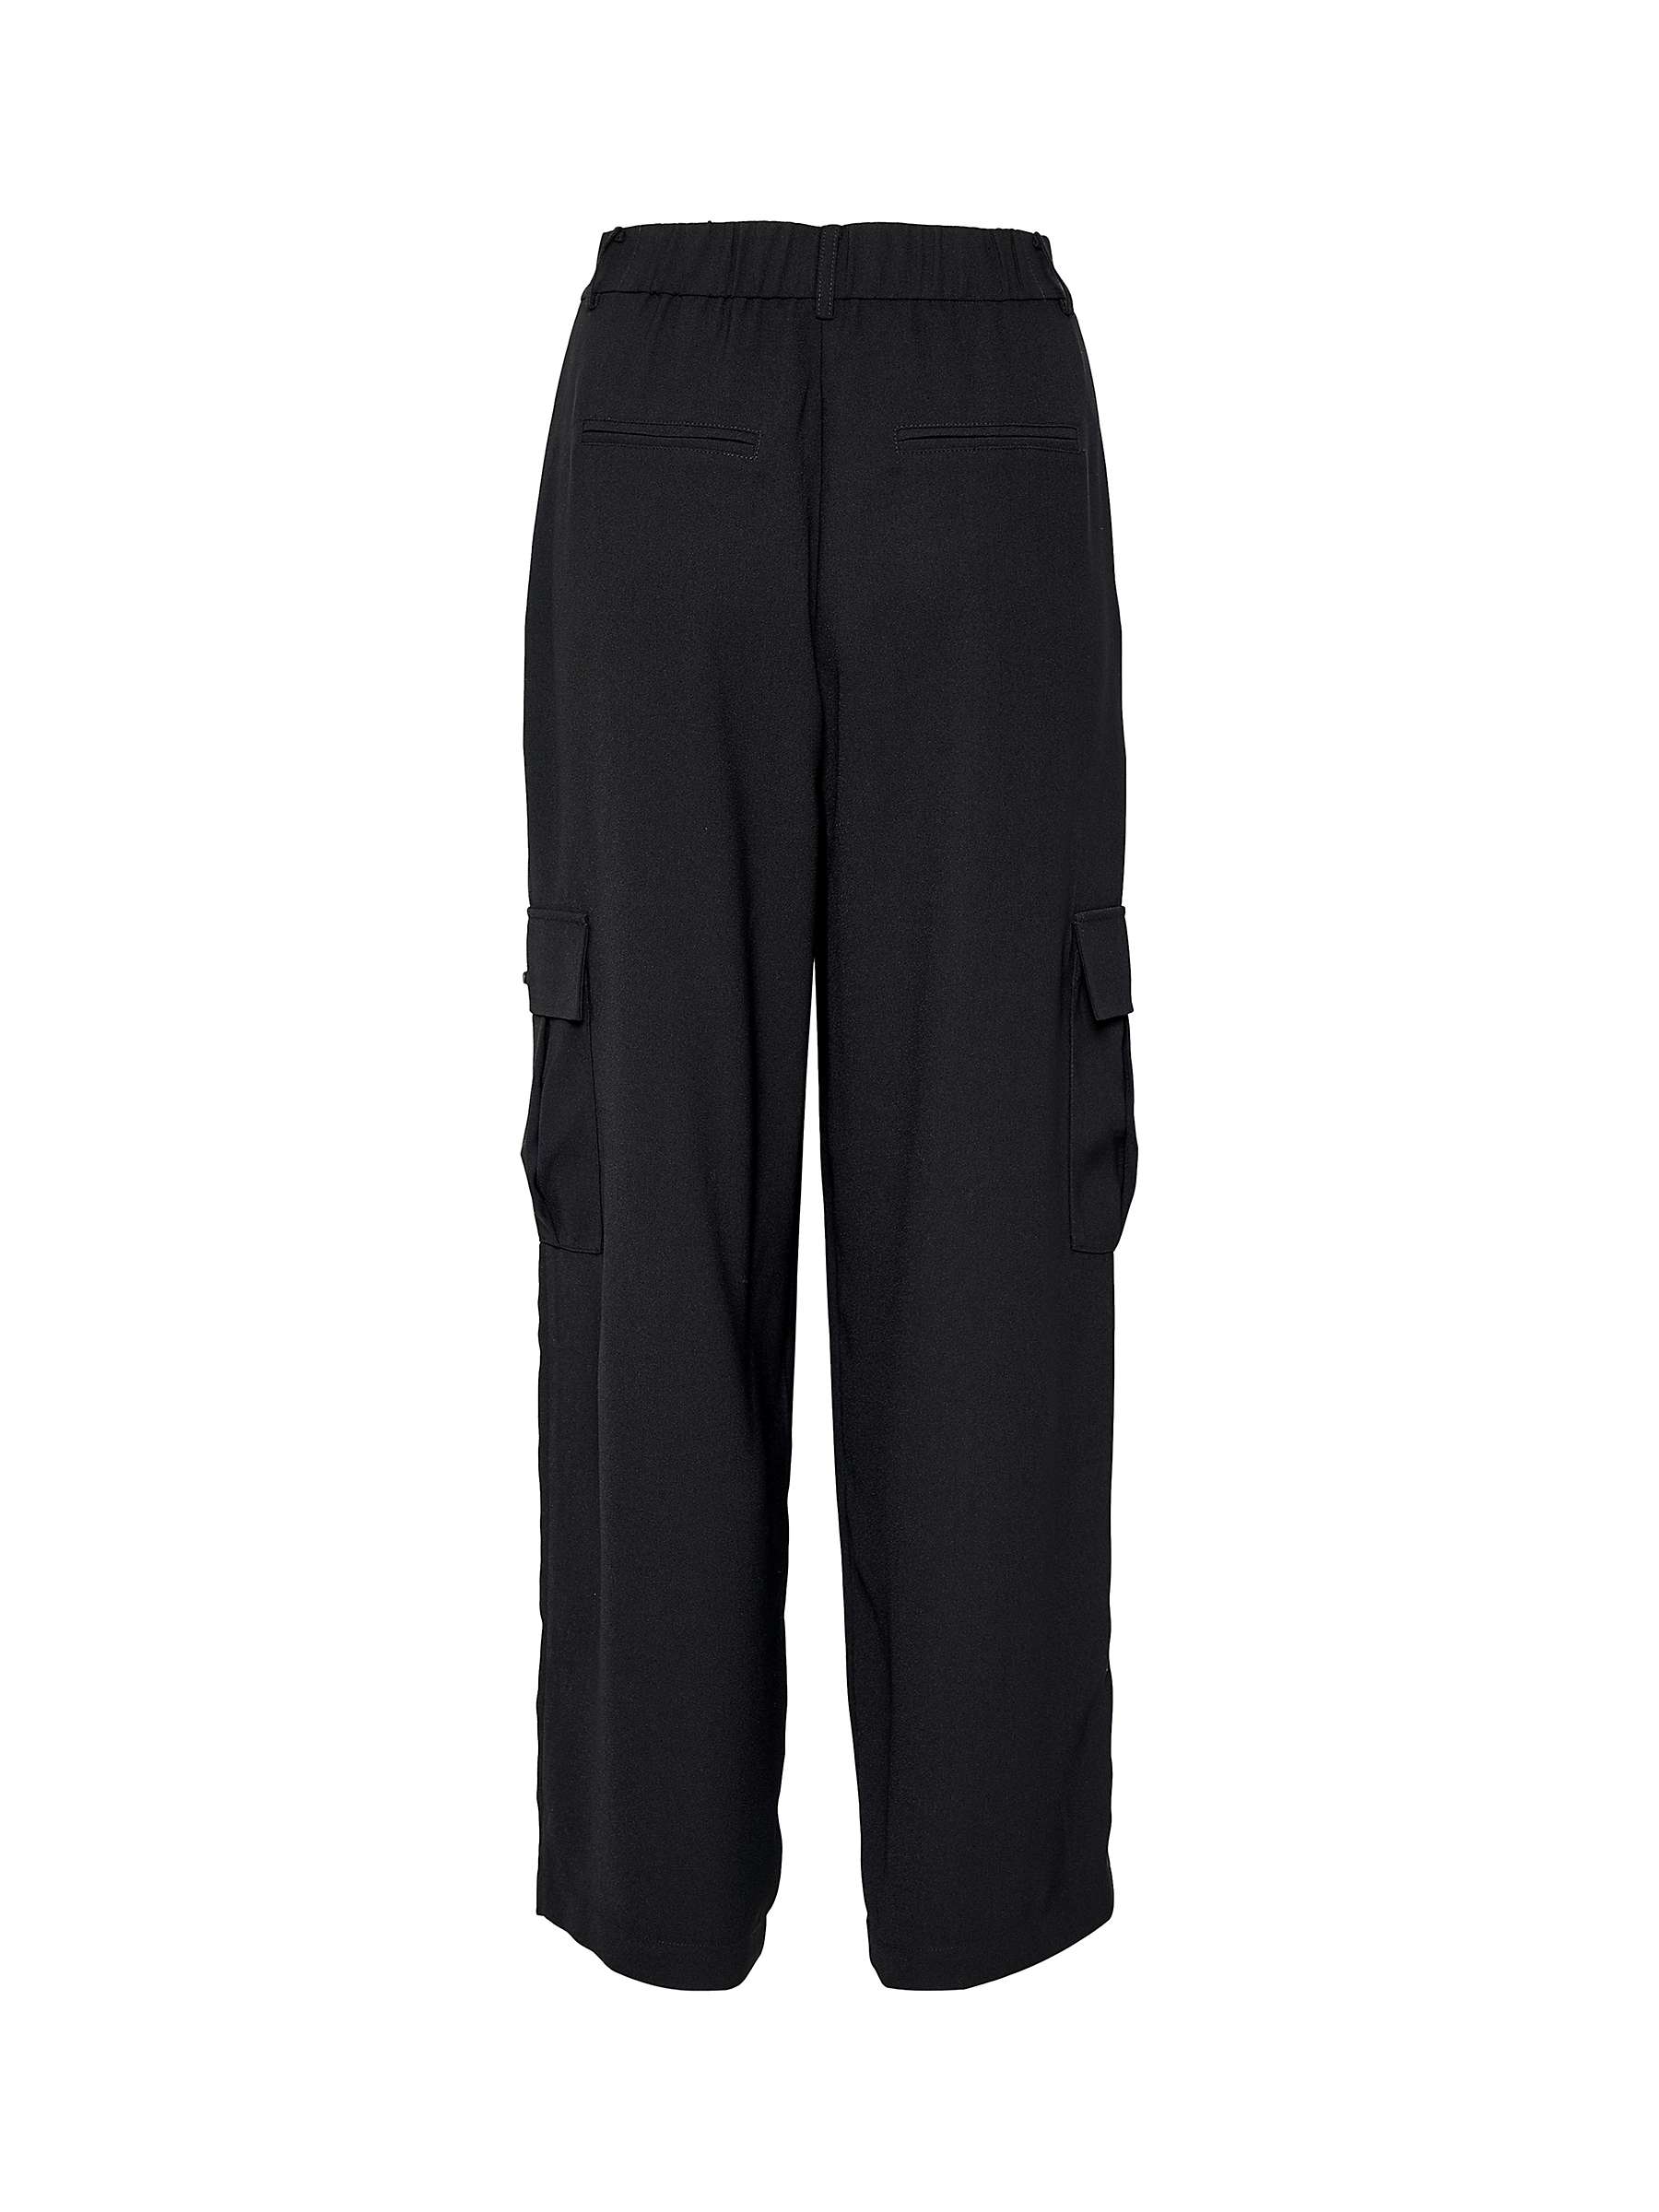 Buy Soaked In Luxury Shirley Tailored Trousers, Black Online at johnlewis.com